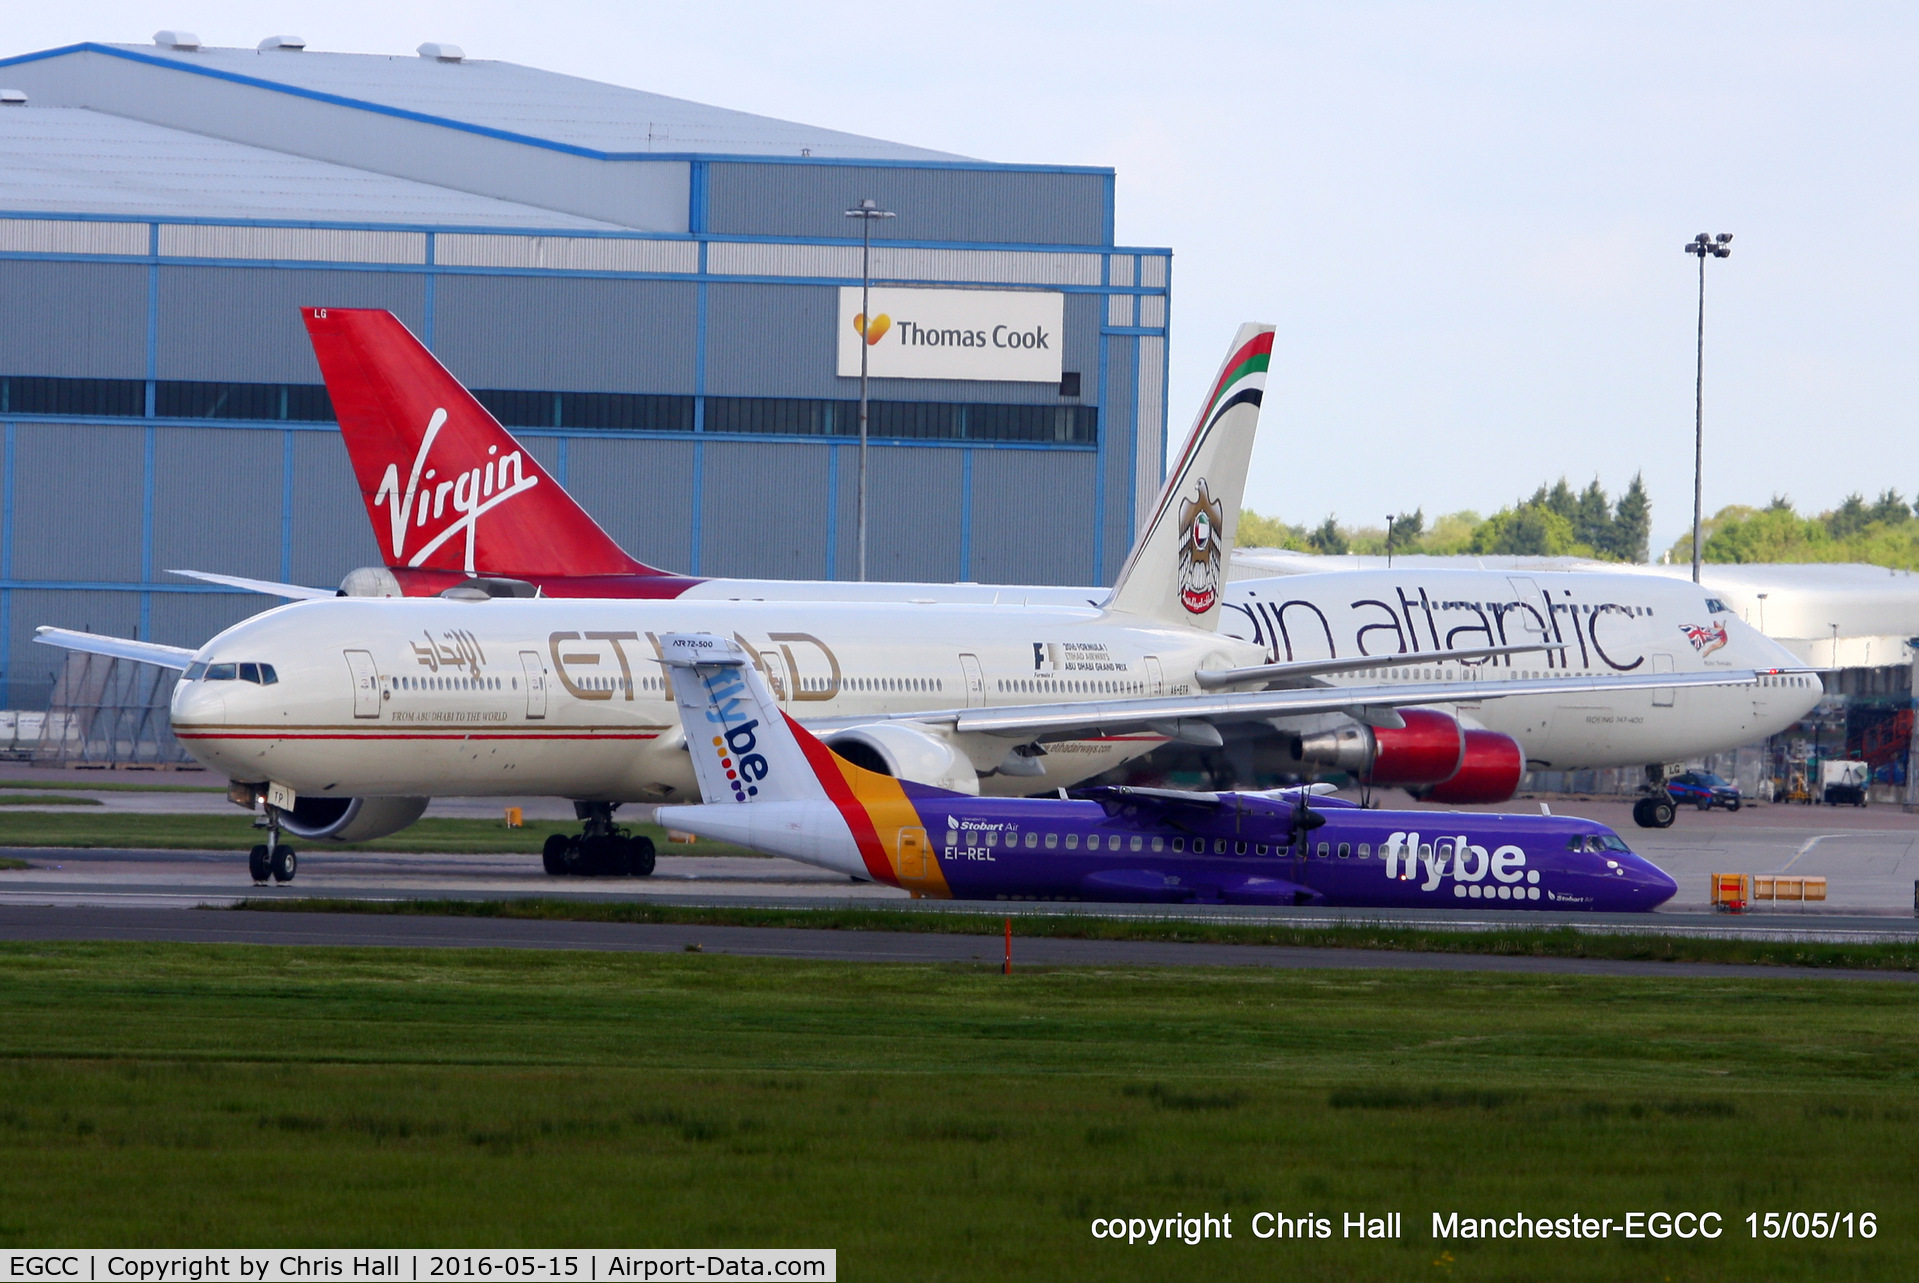 Manchester Airport, Manchester, England United Kingdom (EGCC) - coming and going at Manchester